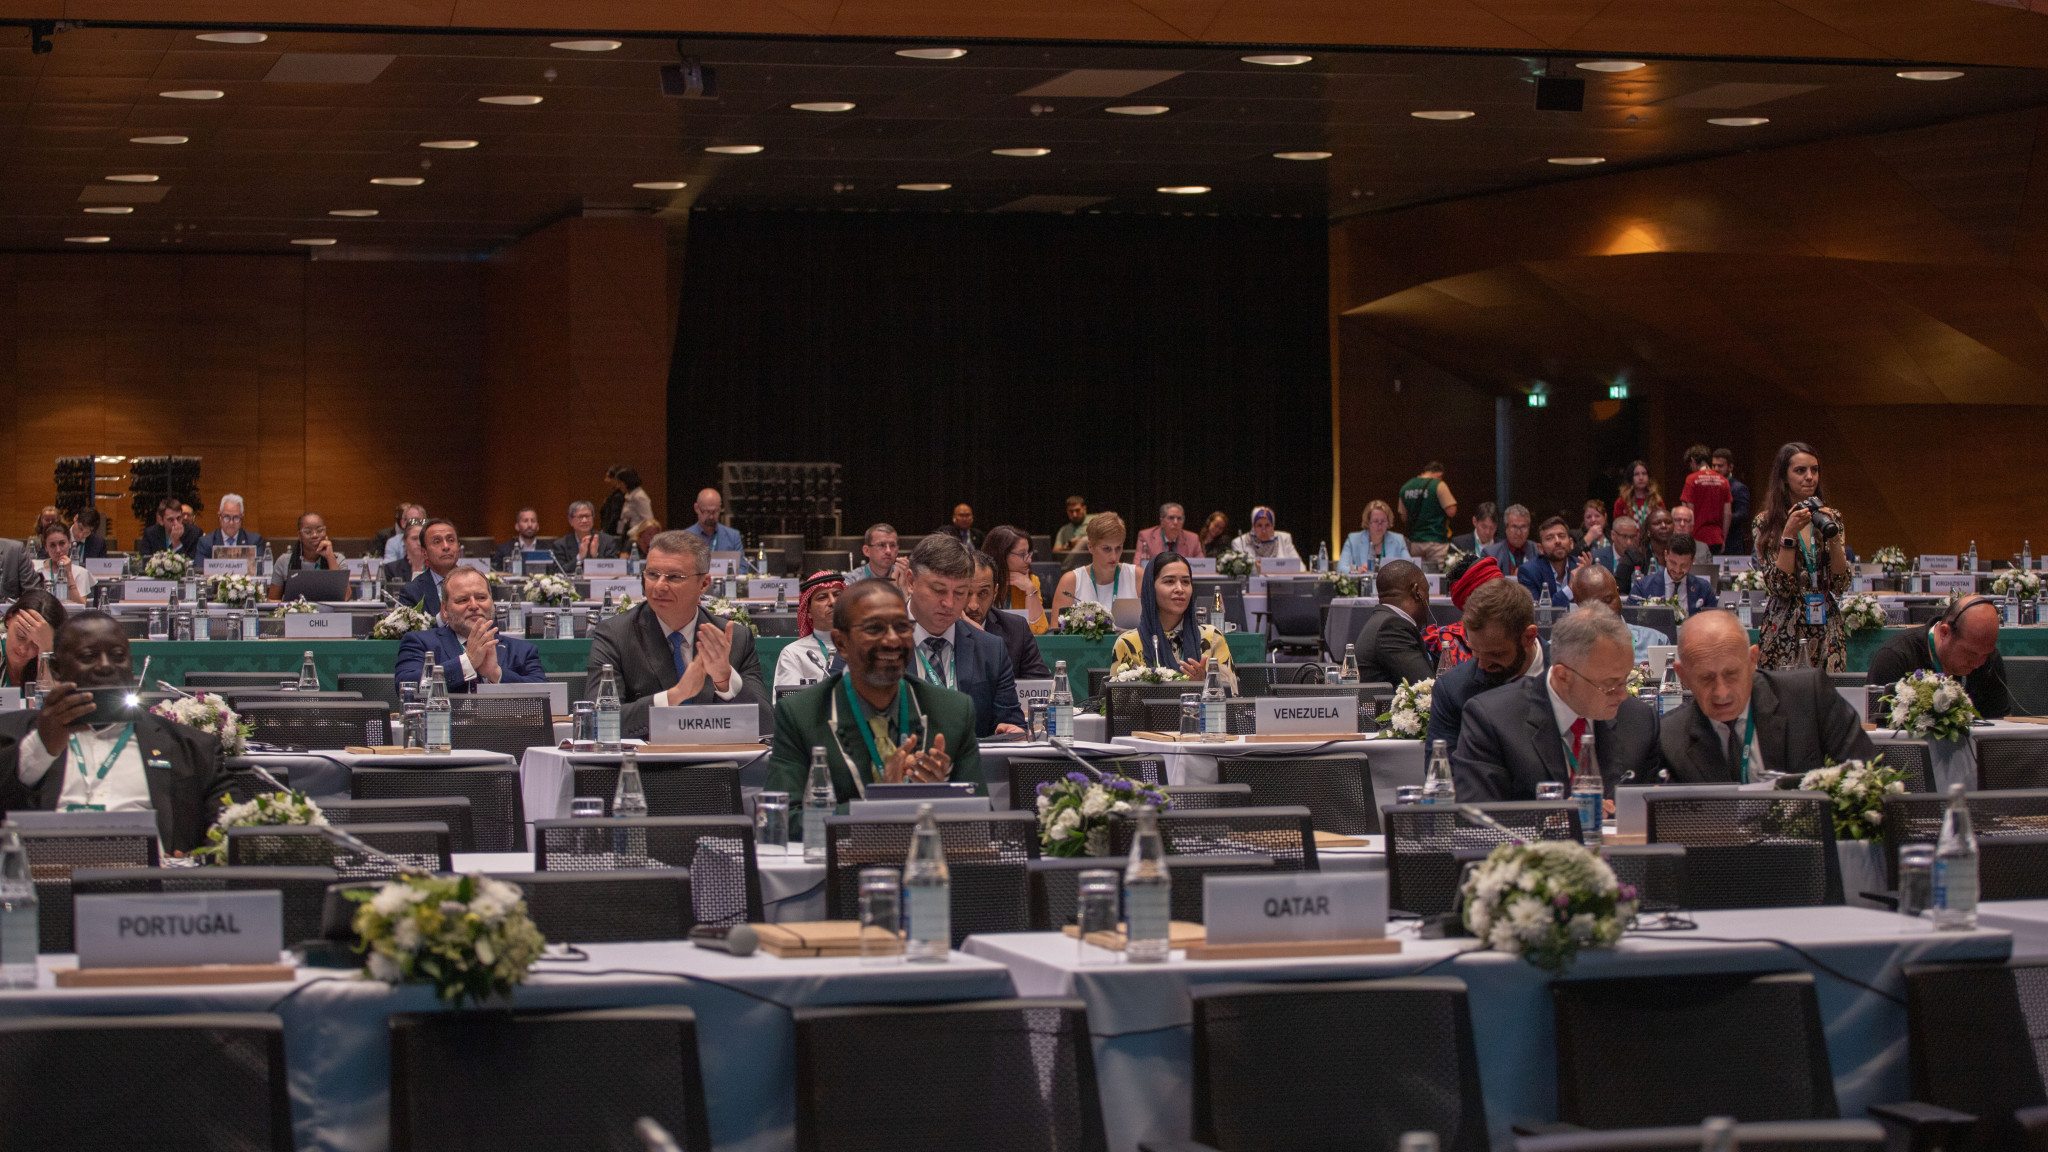 Delegates applaud as the Fit for Life Alliance is adopted by acclamation in Baku ©MINEPS VII